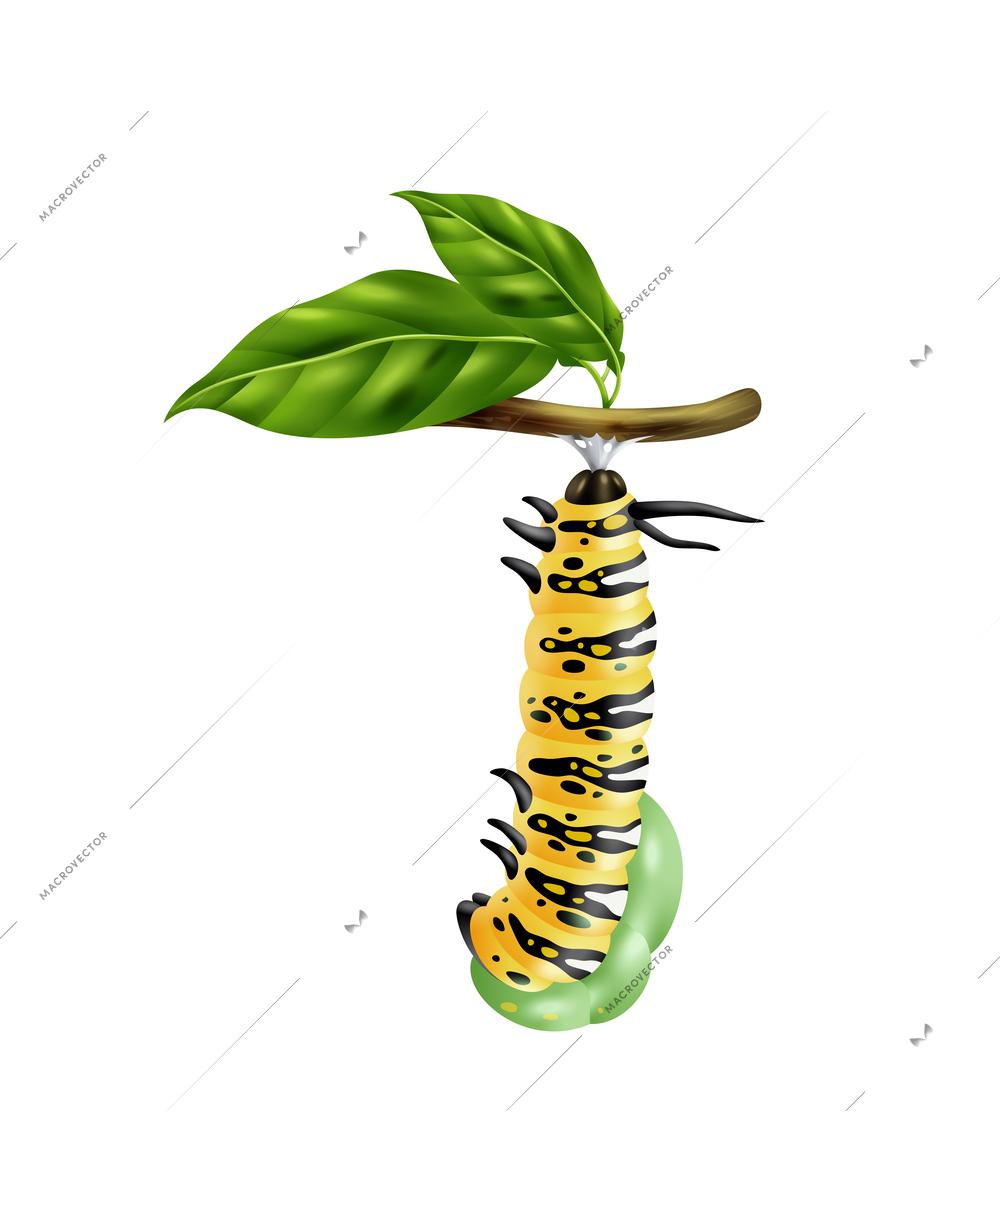 Realistic monarch butterfly life cycle stage with caterpillar on green branch vector illustration